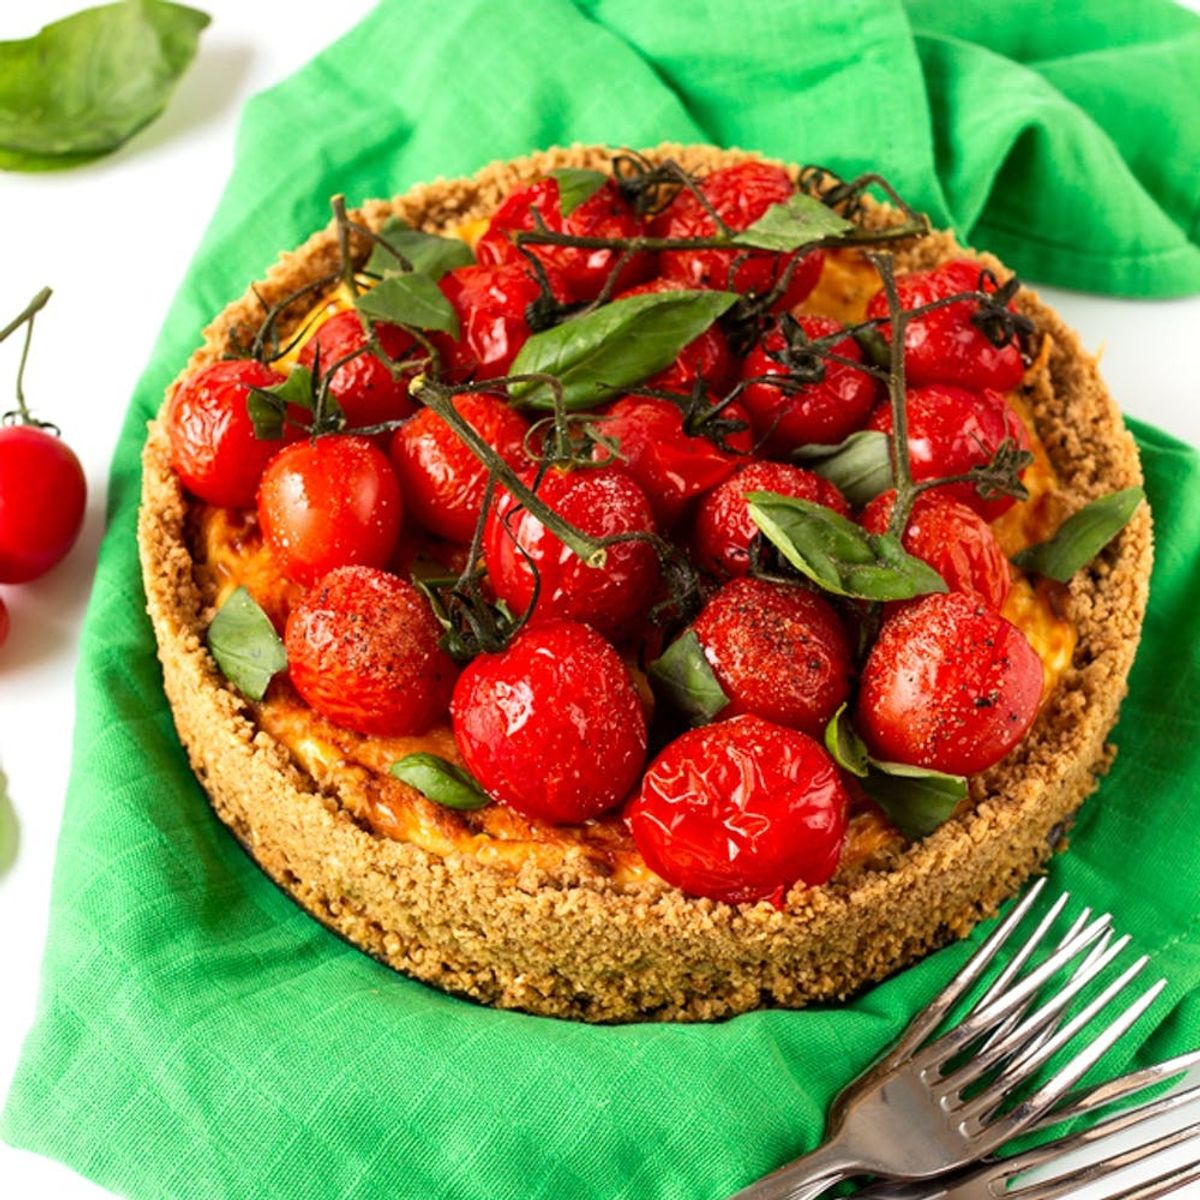 You Can Legit Eat This Savory Cheesecake for Dinner